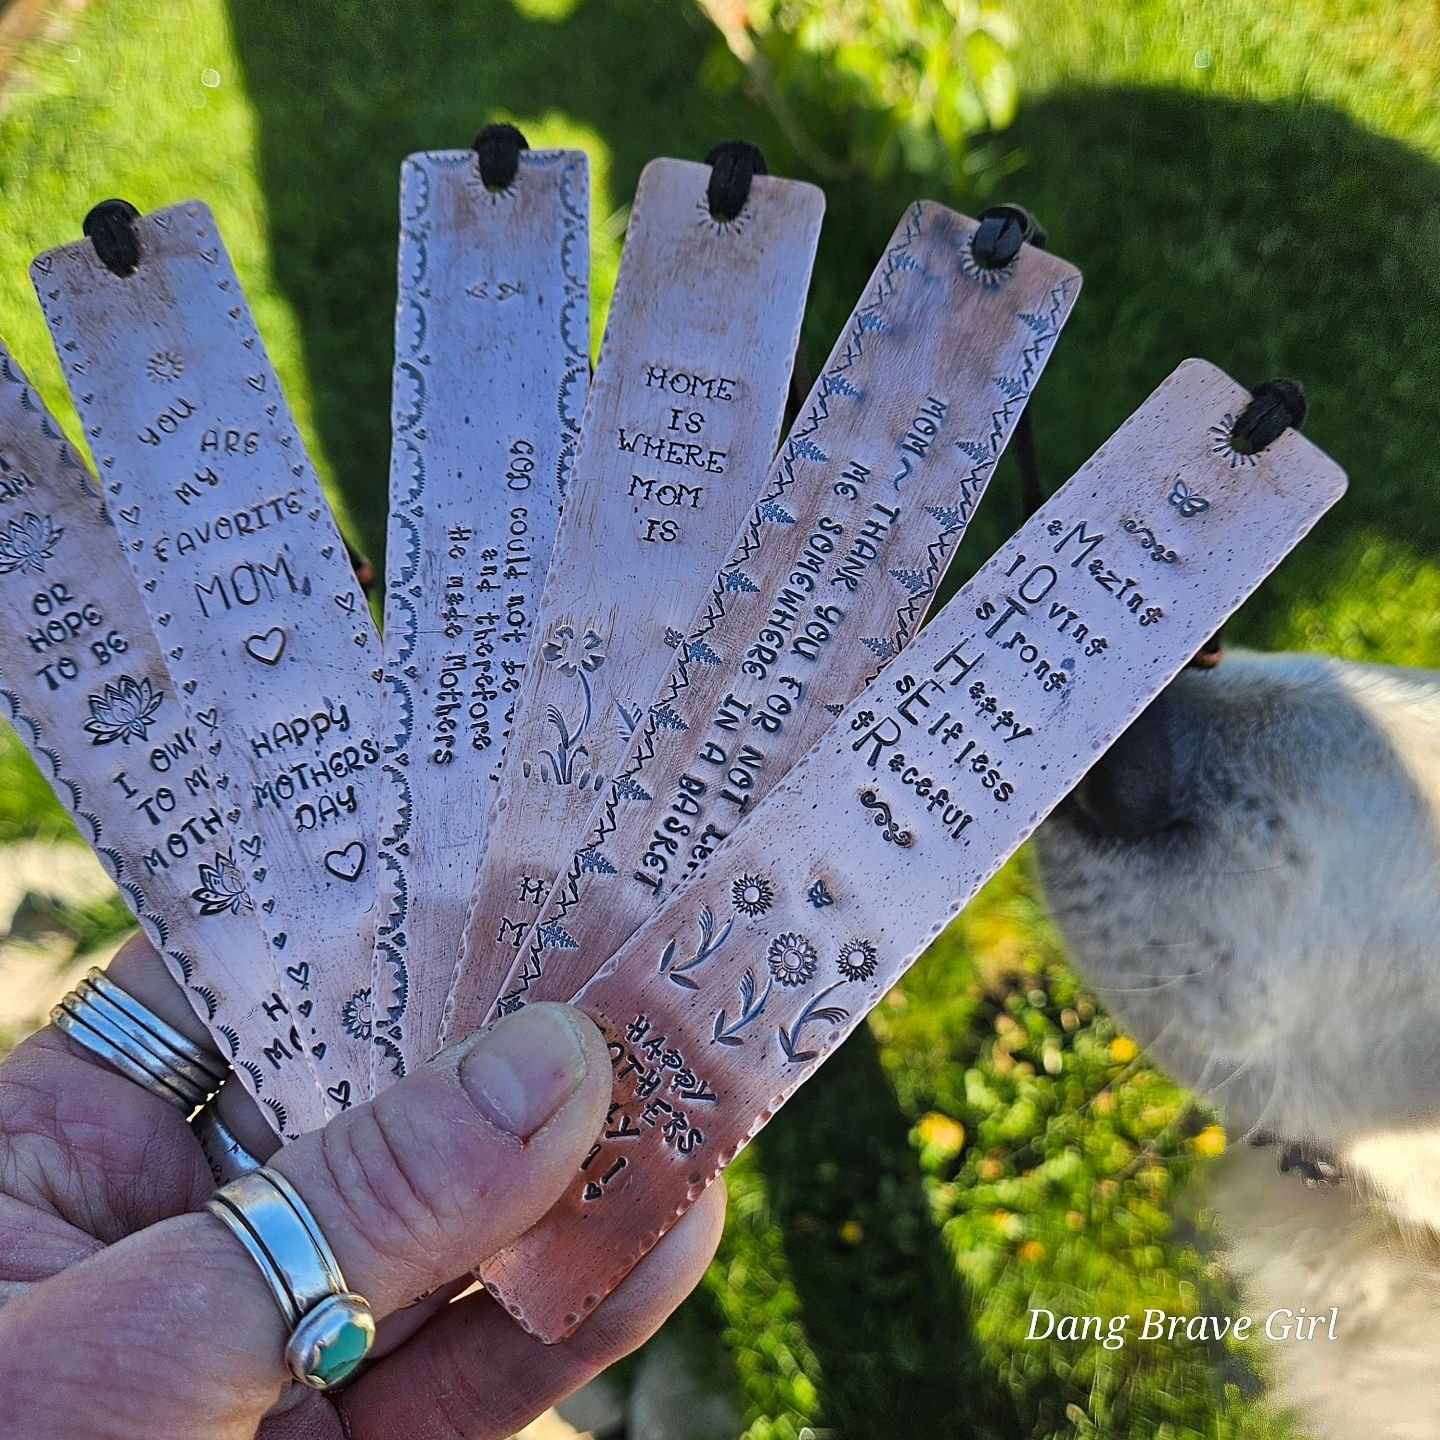 Willie 🐶 approved!

I have a few bookmarks for Mother's Day... they are not on the website, so just message me if you're interested.

$35 shipped (US).

They are all hand stamped copper with leather tassels and copper accent beads.